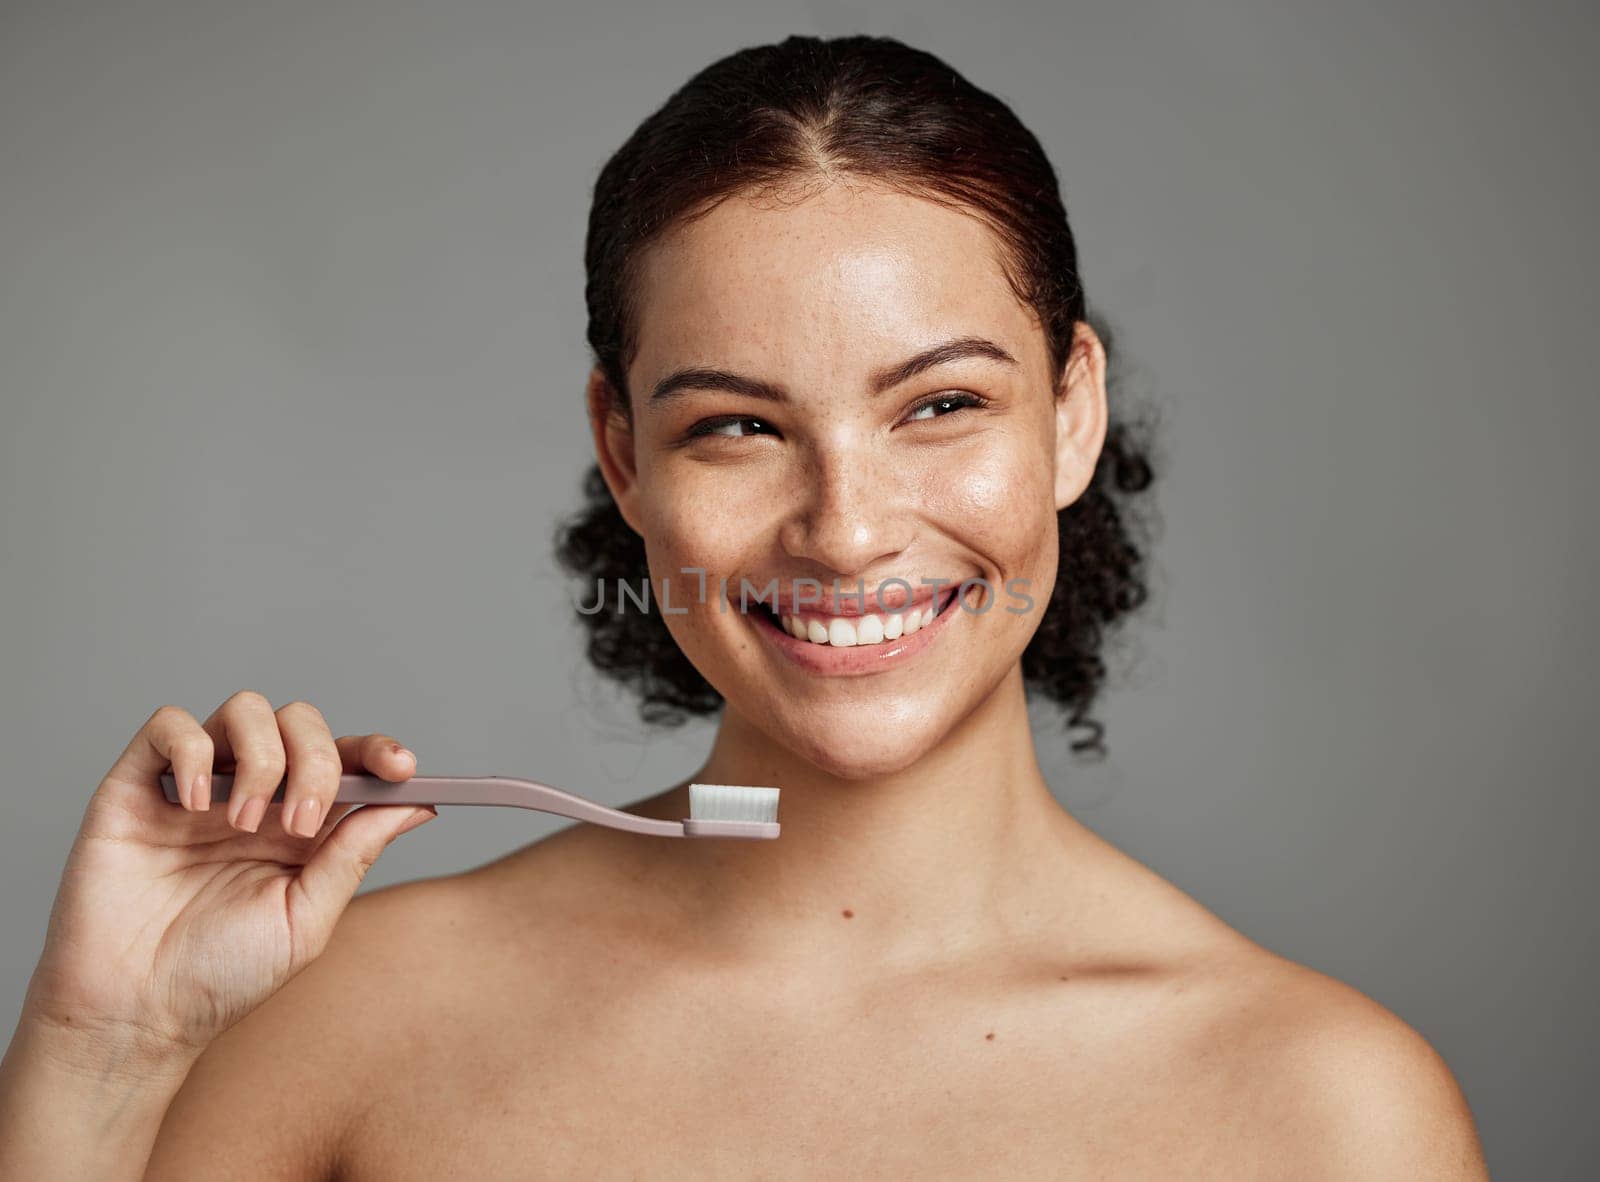 Dental smile, toothbrush and woman brushing teeth for hygiene, cleaning and teeth whitening in studio. Happy female face on grey background for oral health, healthy mouth and self care for wellness.